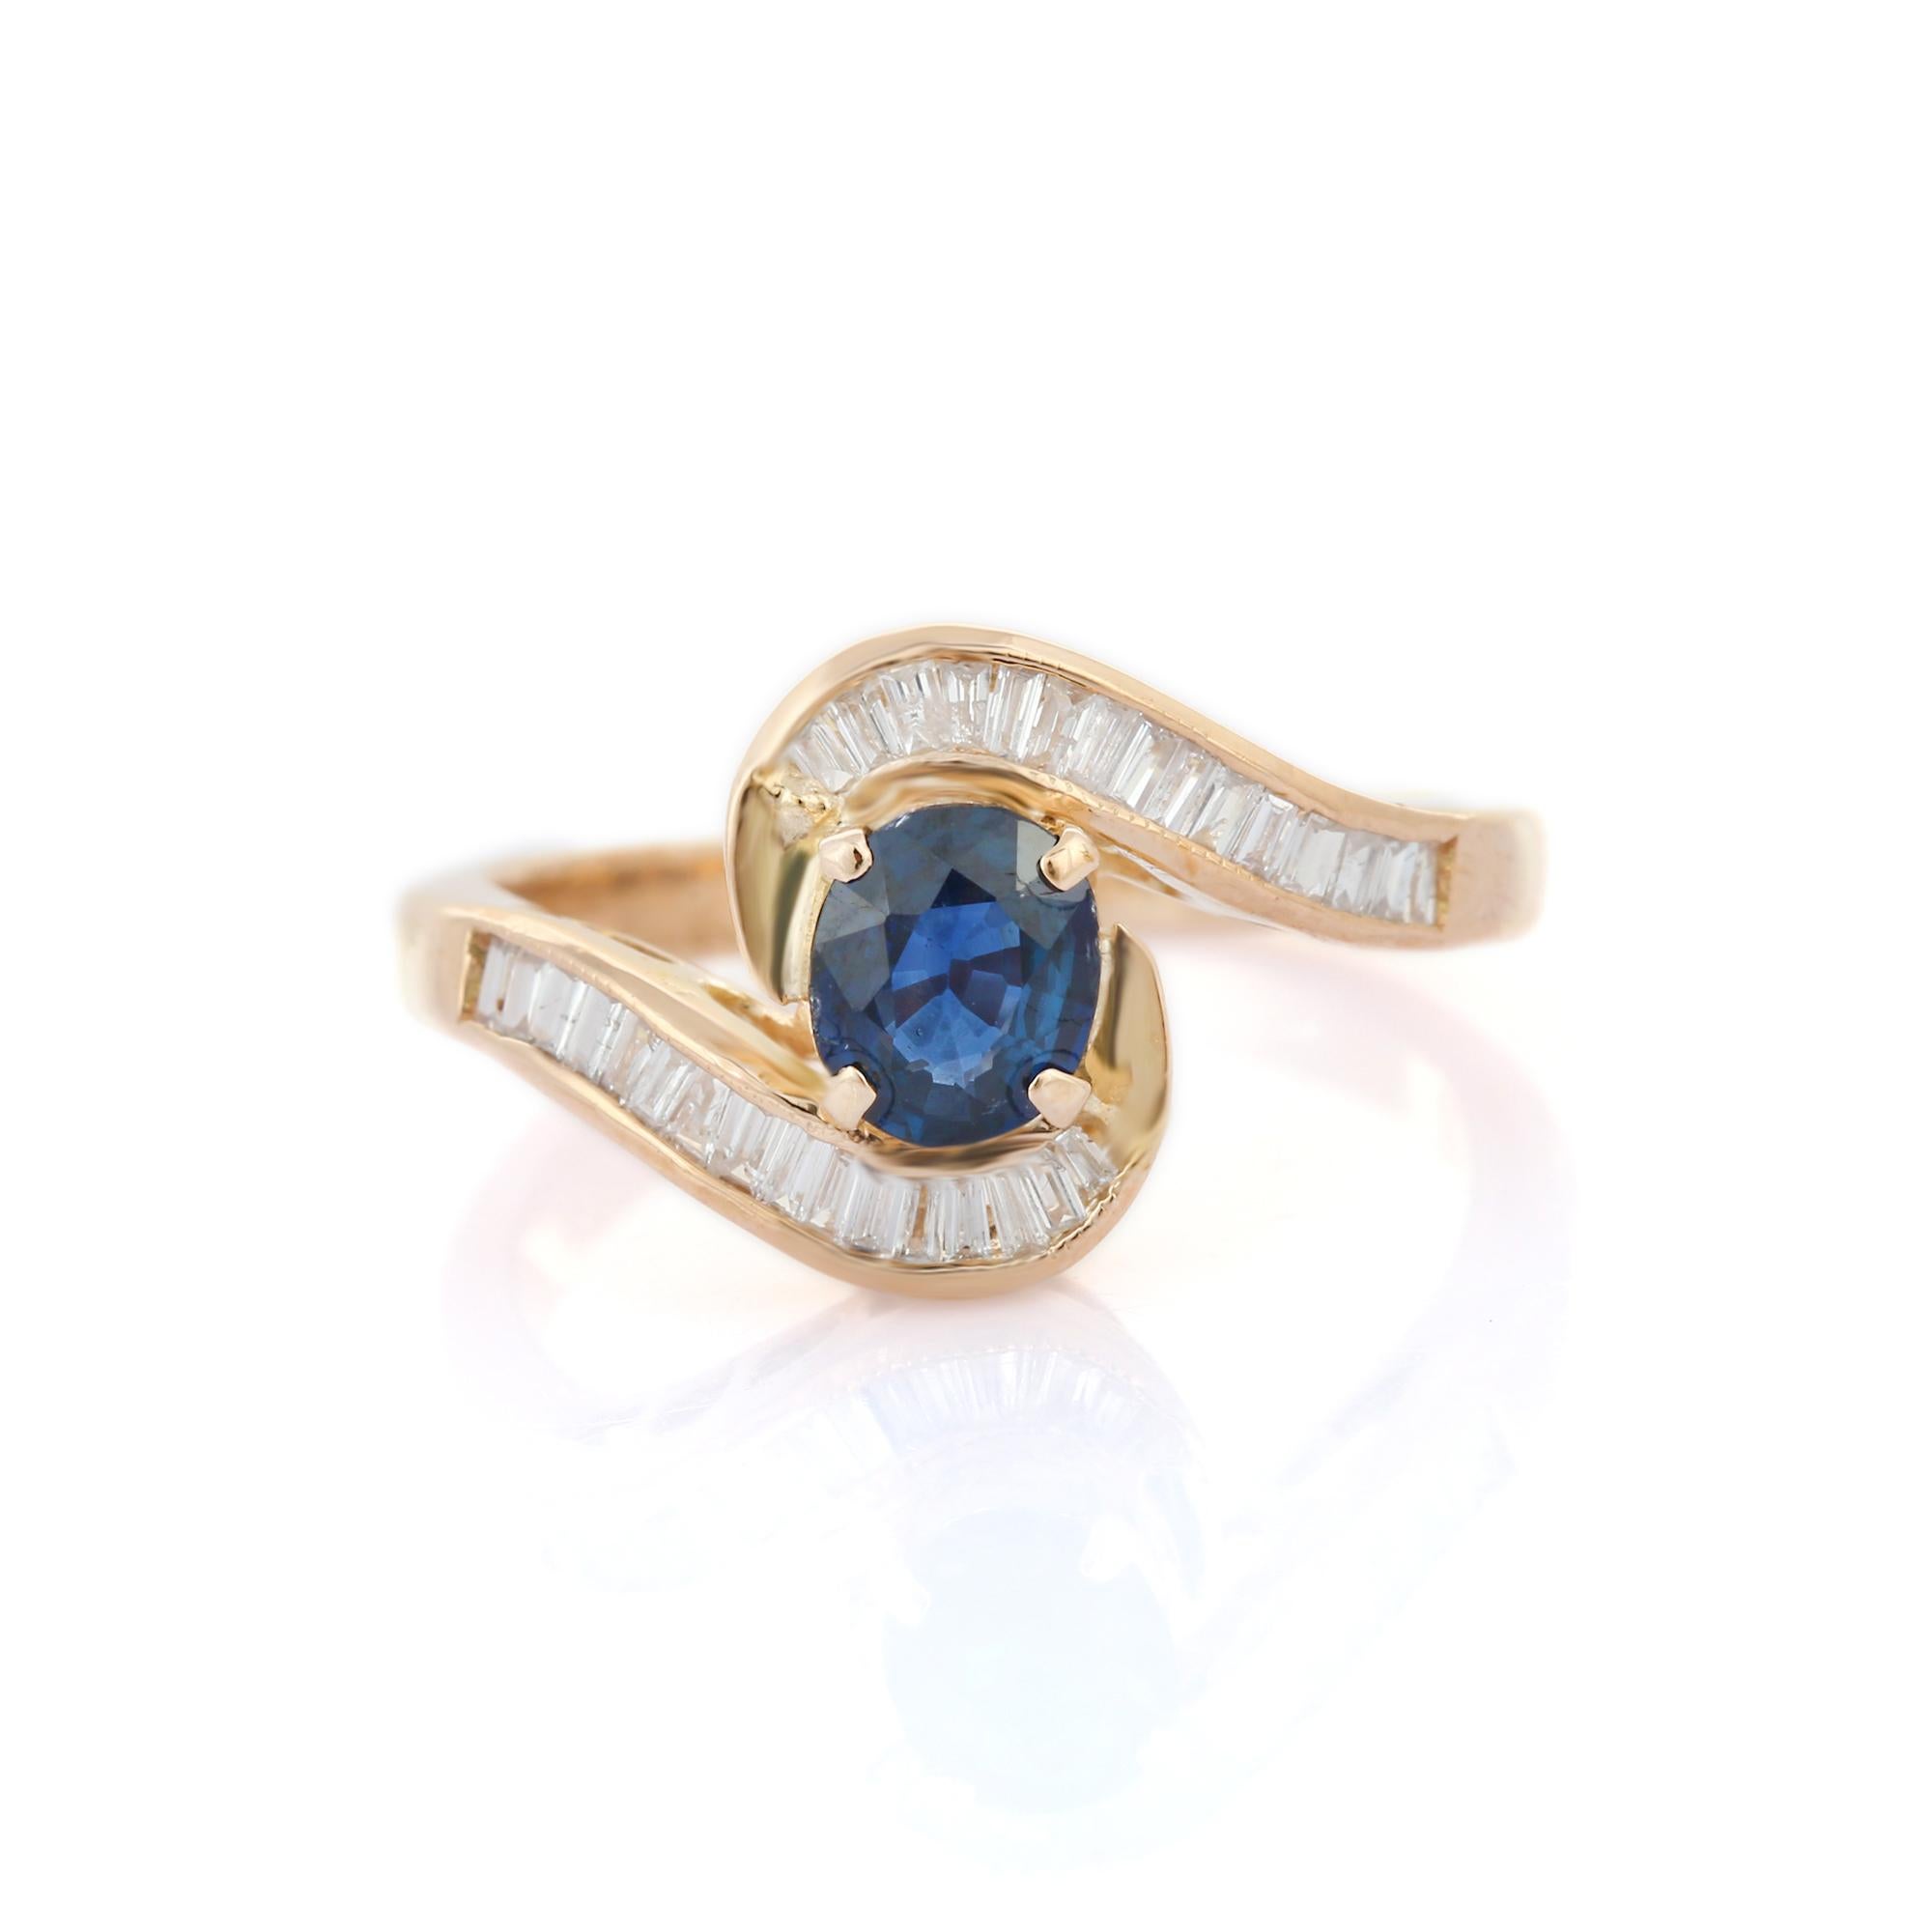 For Sale:  Diamond and Blue Sapphire Cross Shank Ring in 14k Solid Yellow Gold 2